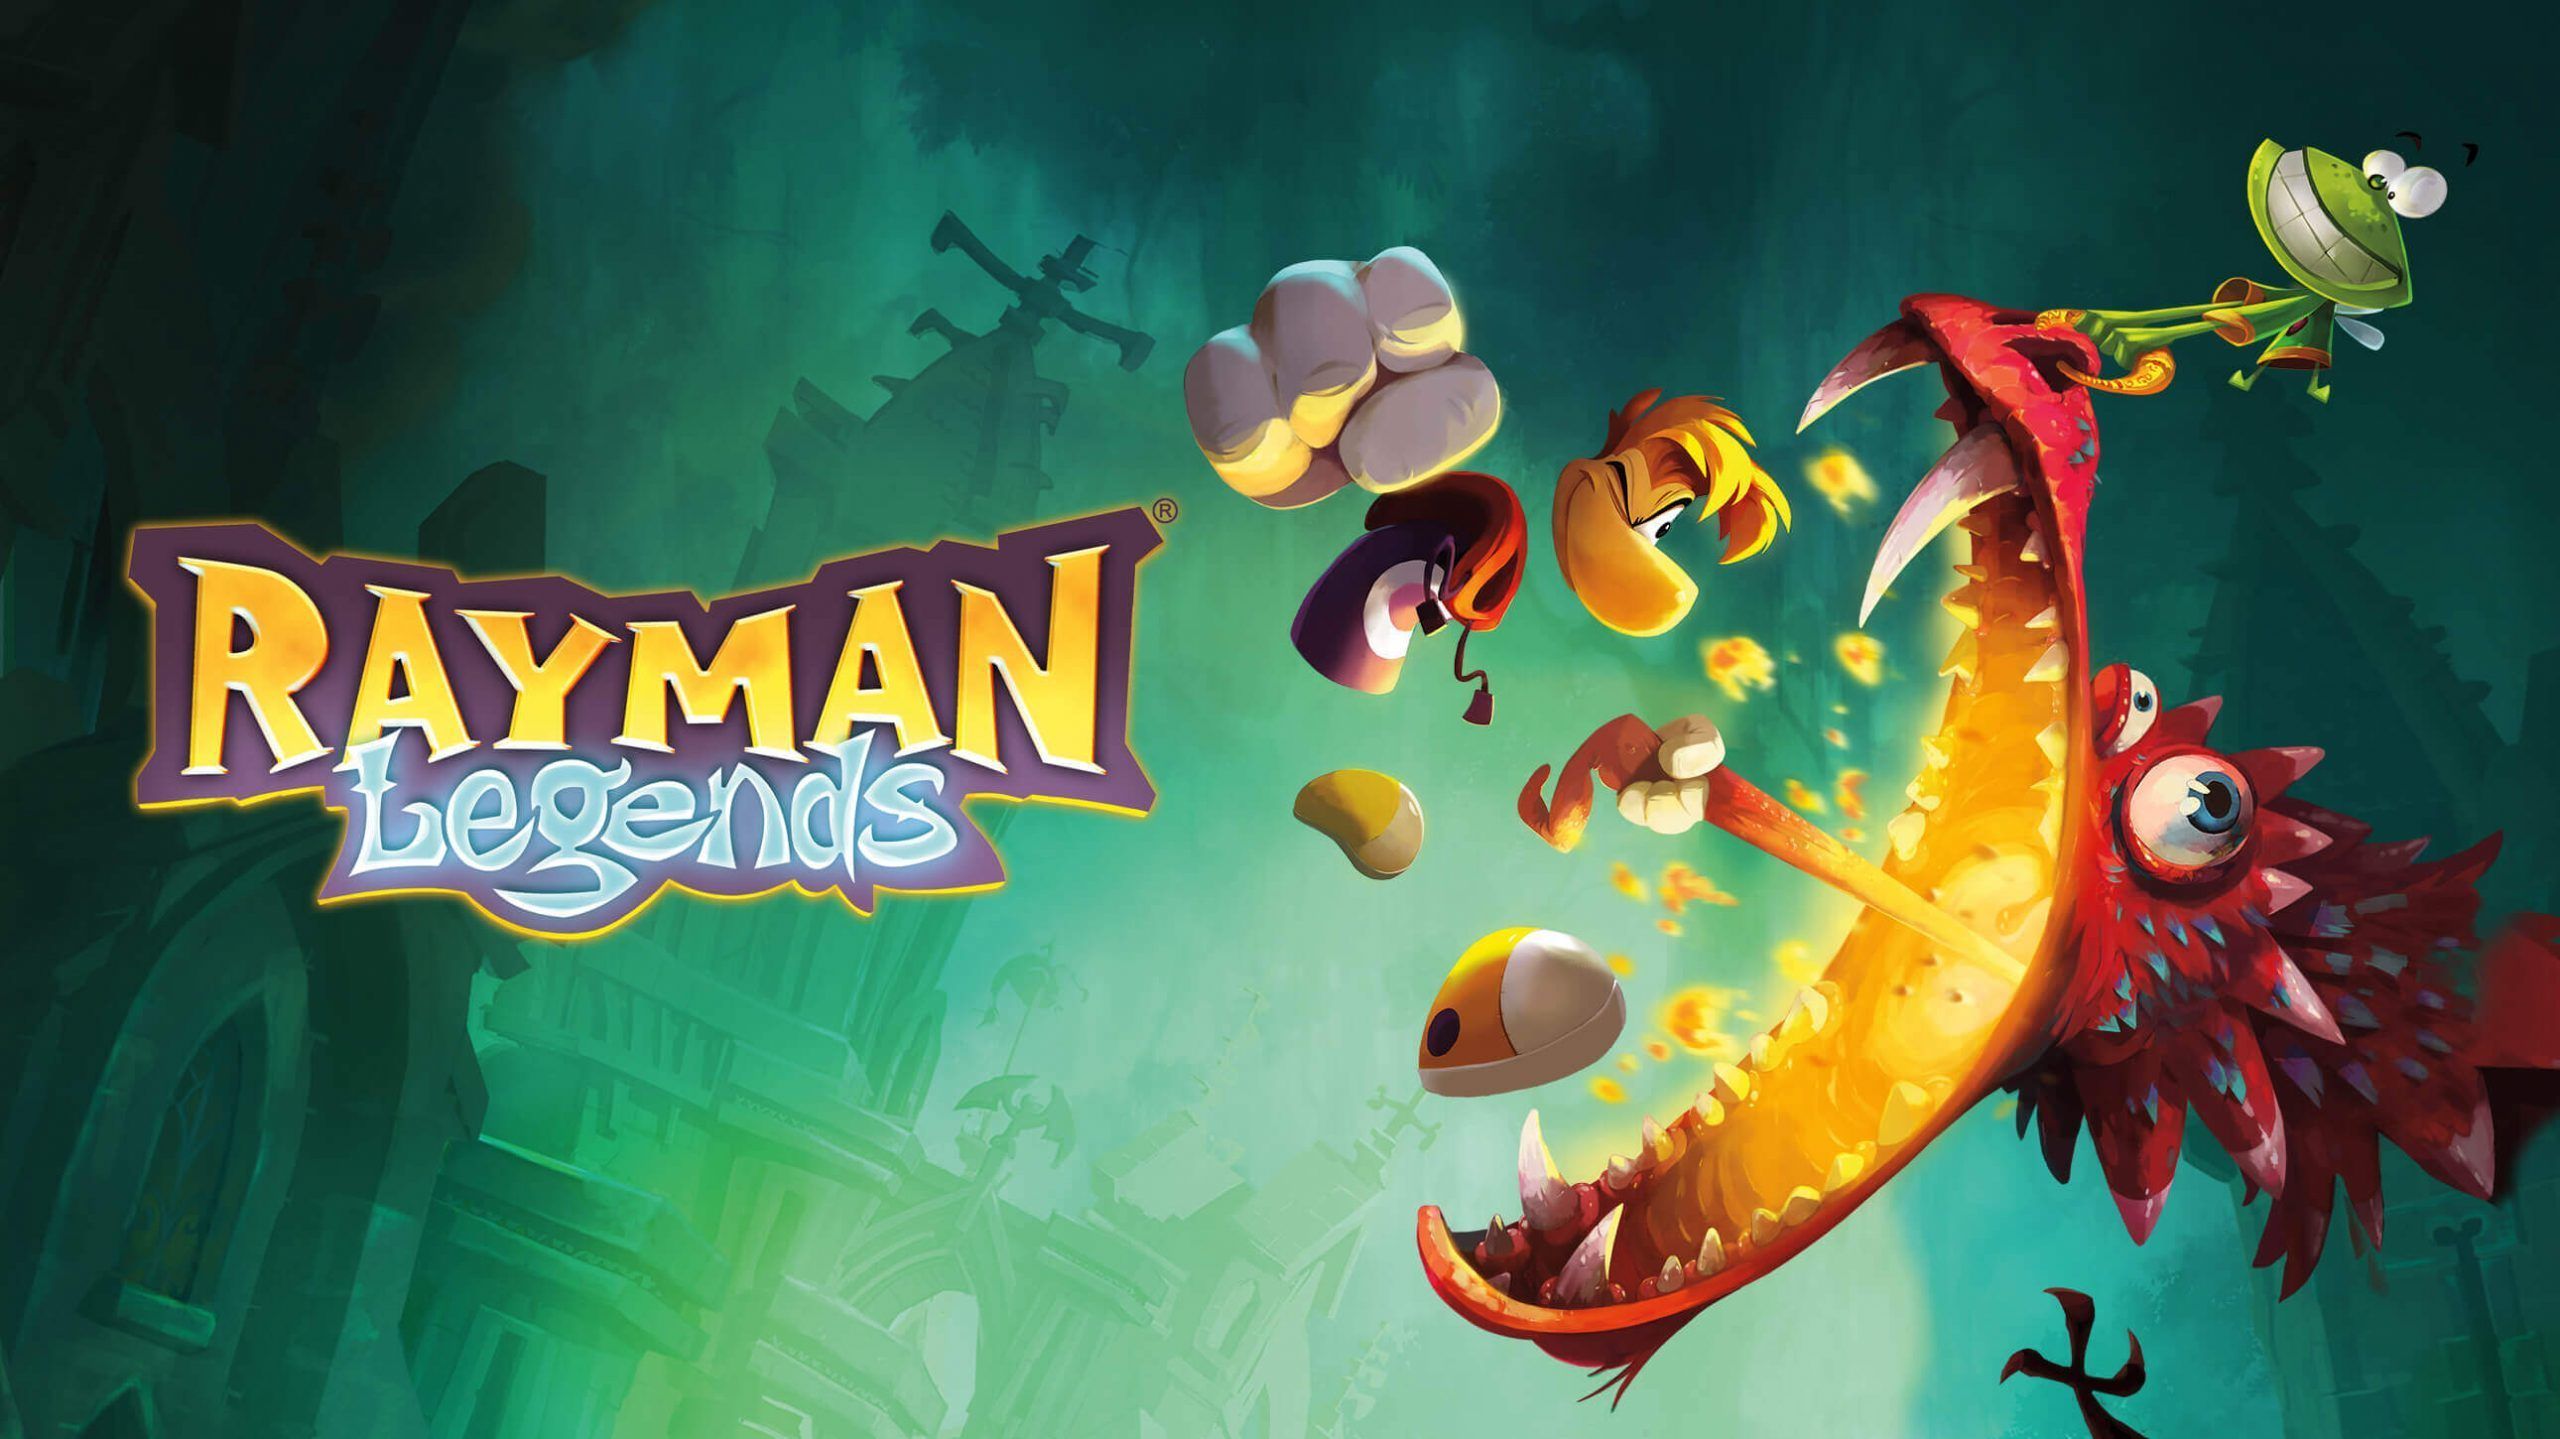 Rayman Legends is on Uplay